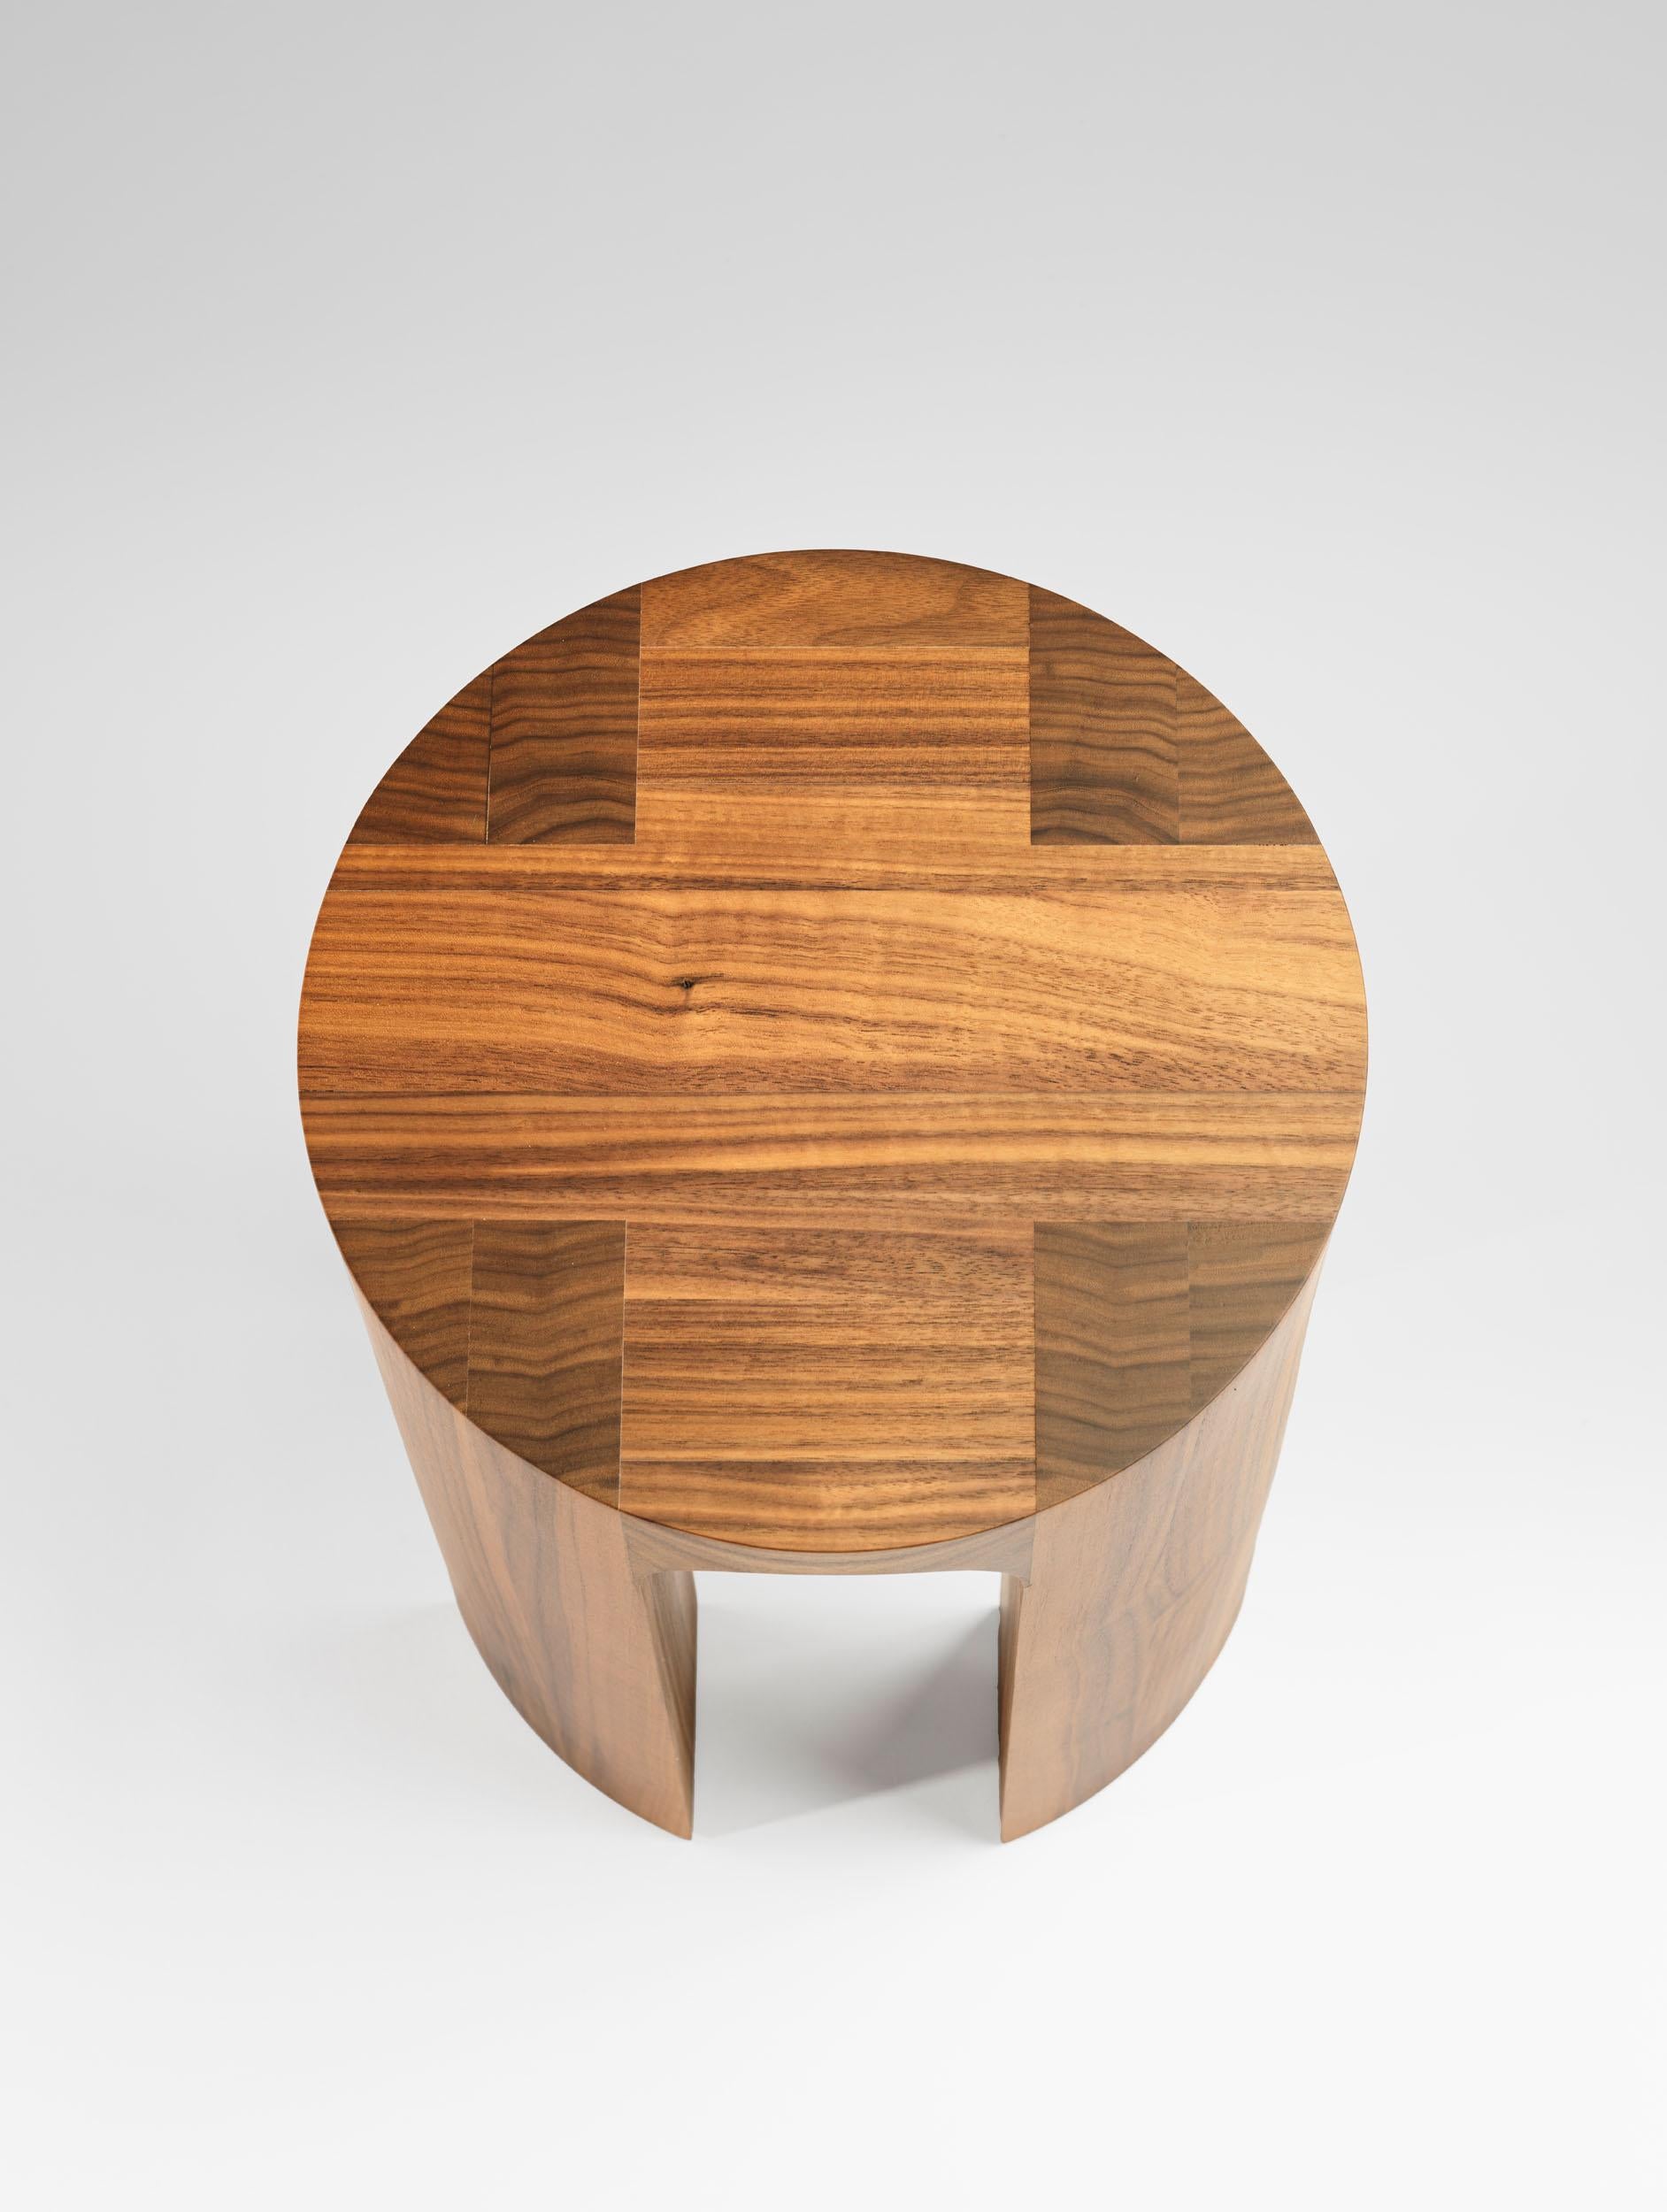 Contemporary Solid American Walnut Arcus Stool by Tim Vranken For Sale 1